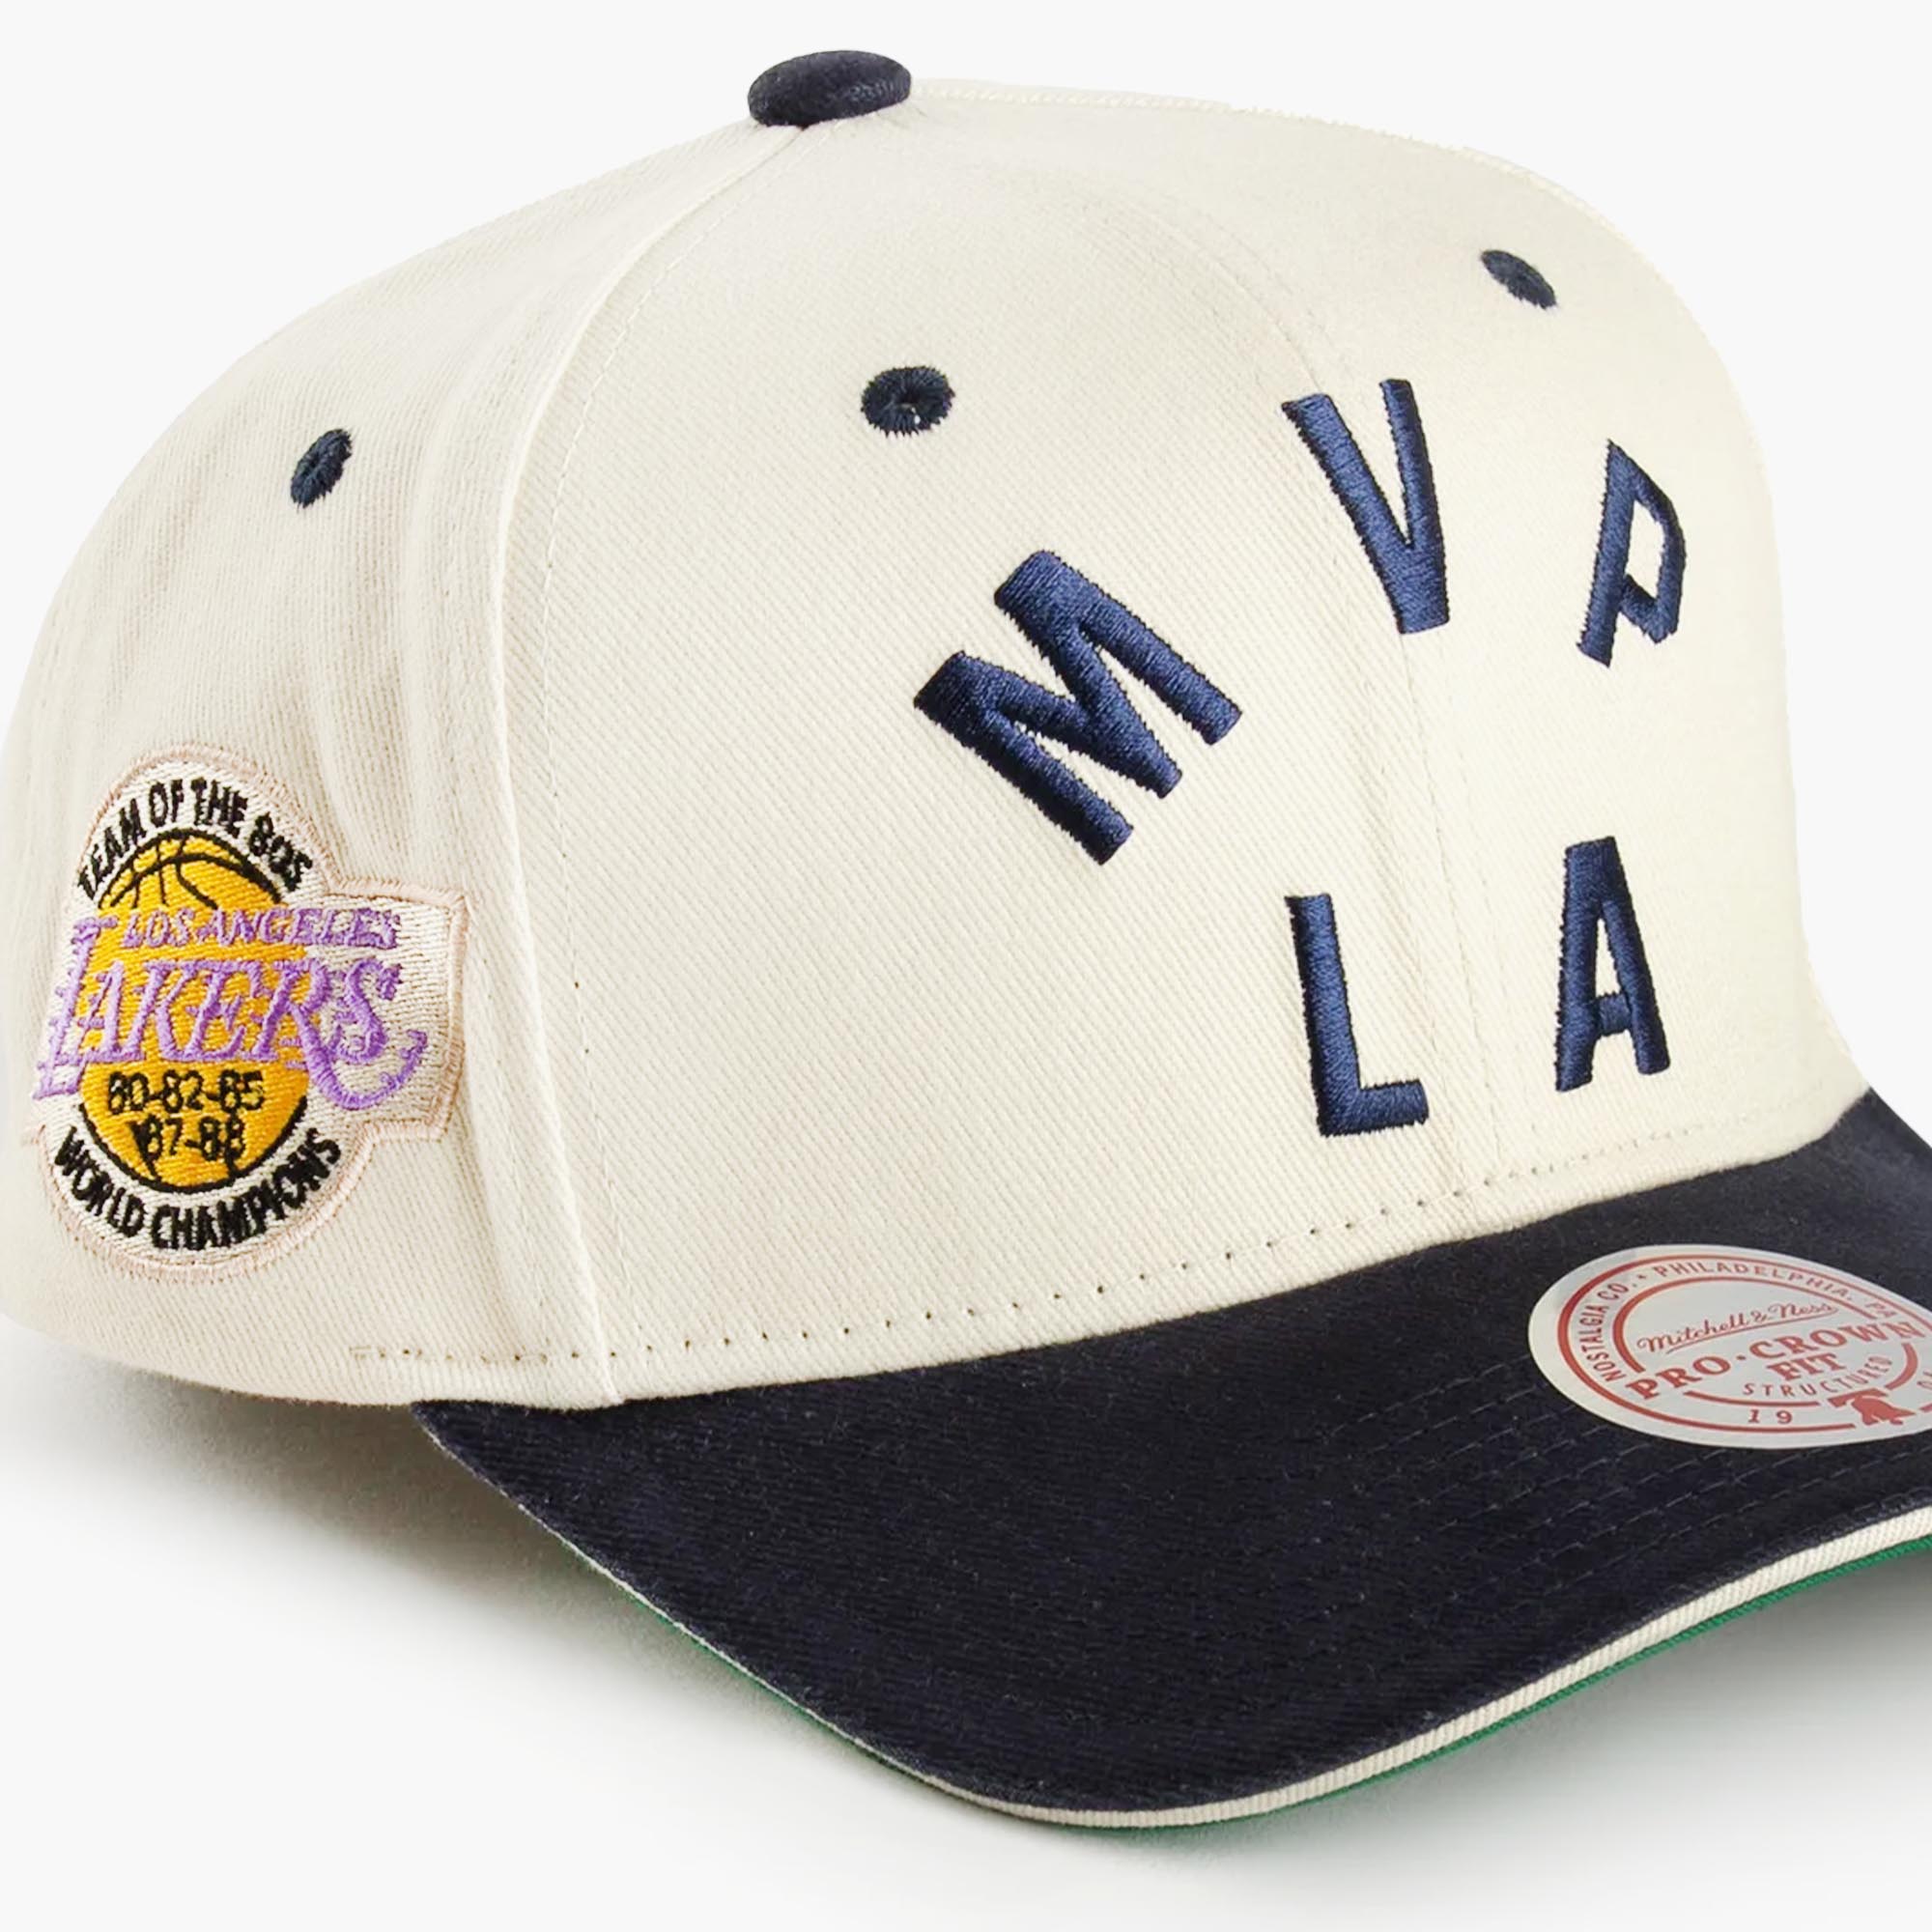 Mitchell & Ness Louisiana State University Tigers Pro Crown Fit Snapback  Hat, CURVED HATS, CAPS